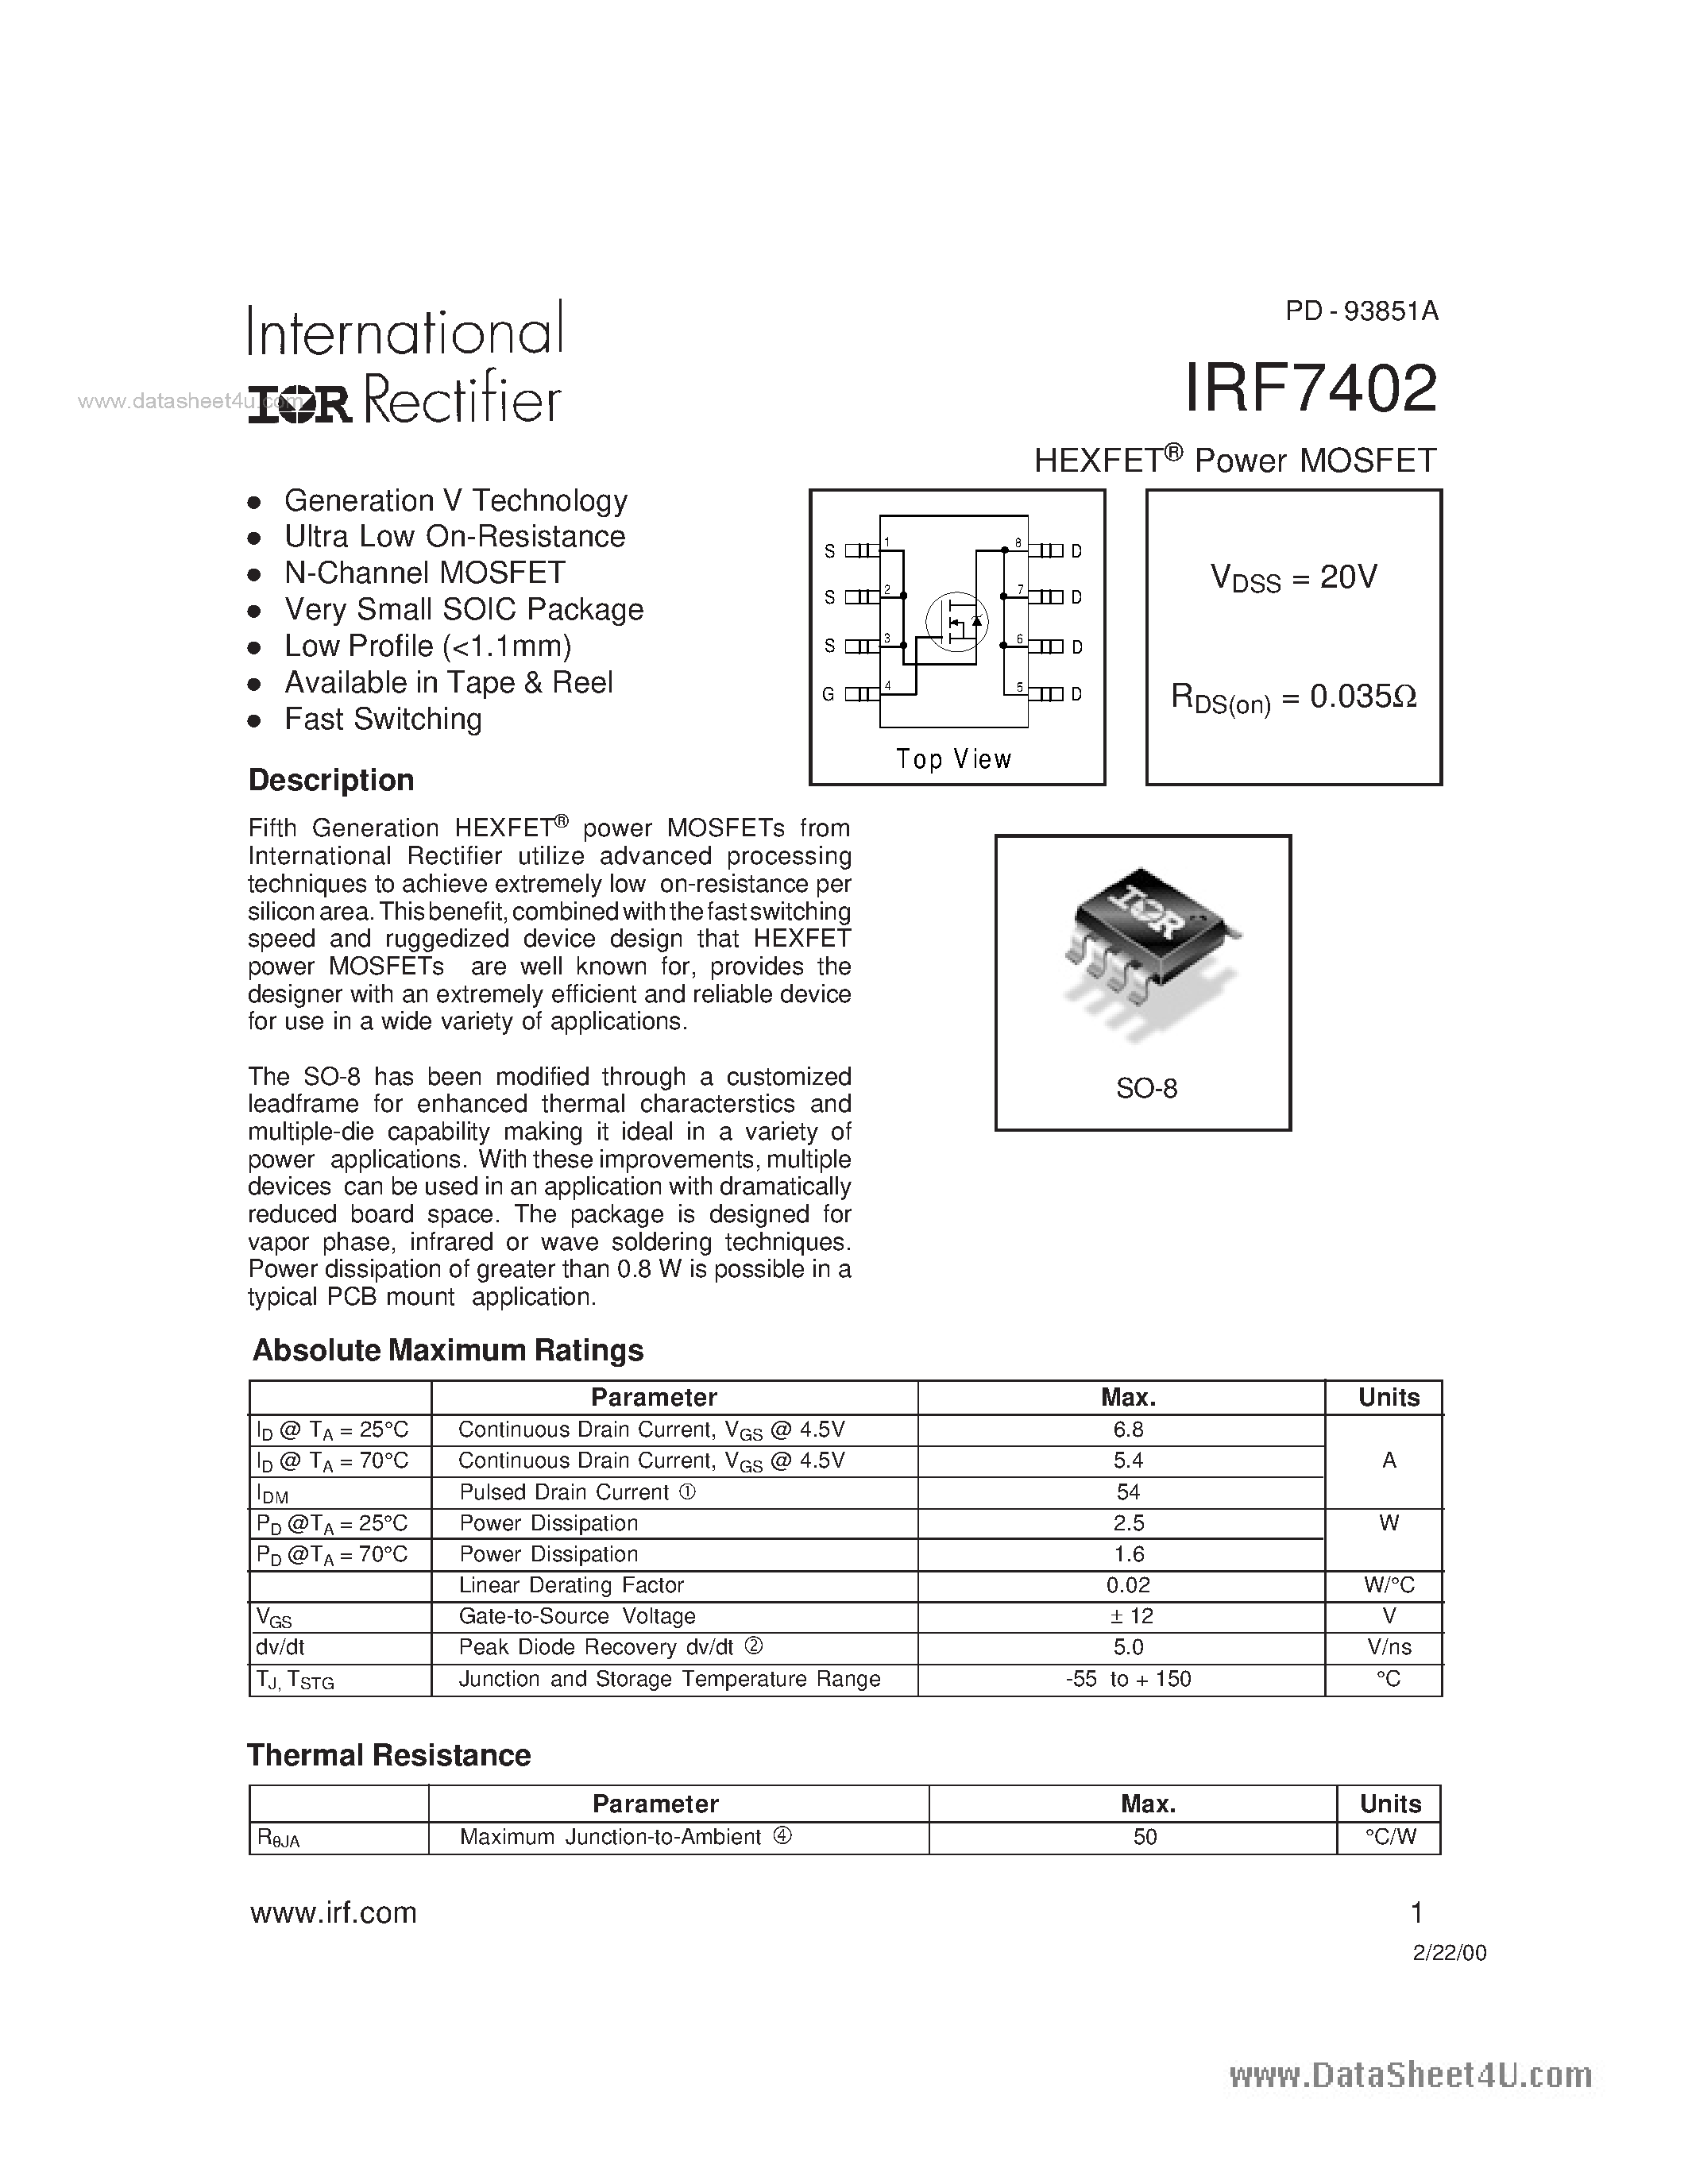 Даташит IRF7402 - HEXFET Power MOSFET страница 1